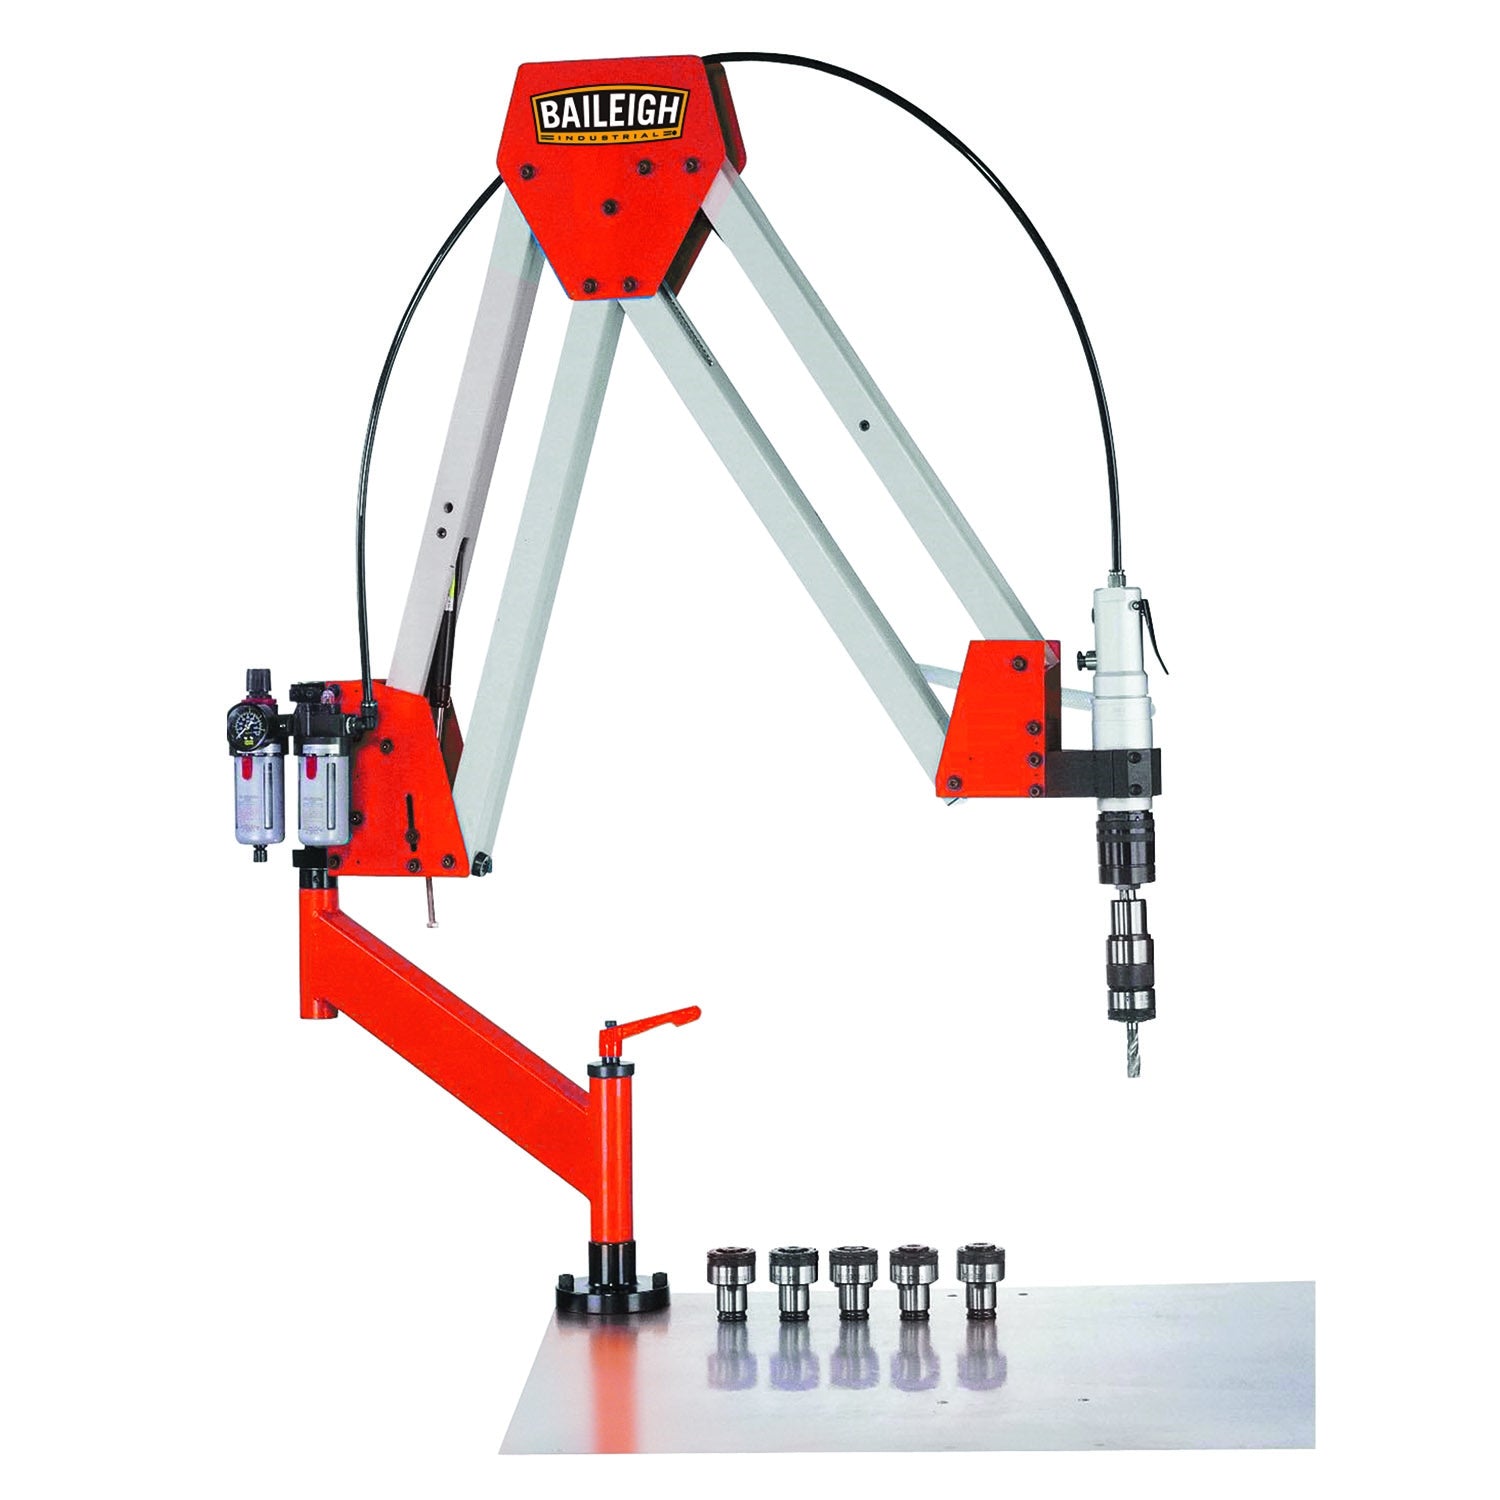 Baileigh ATM-27-1900 Double Arm Articulated Air Powered Tapping Machine, 1/8" to 1" Tapping Capacity, 74" Max Work Range